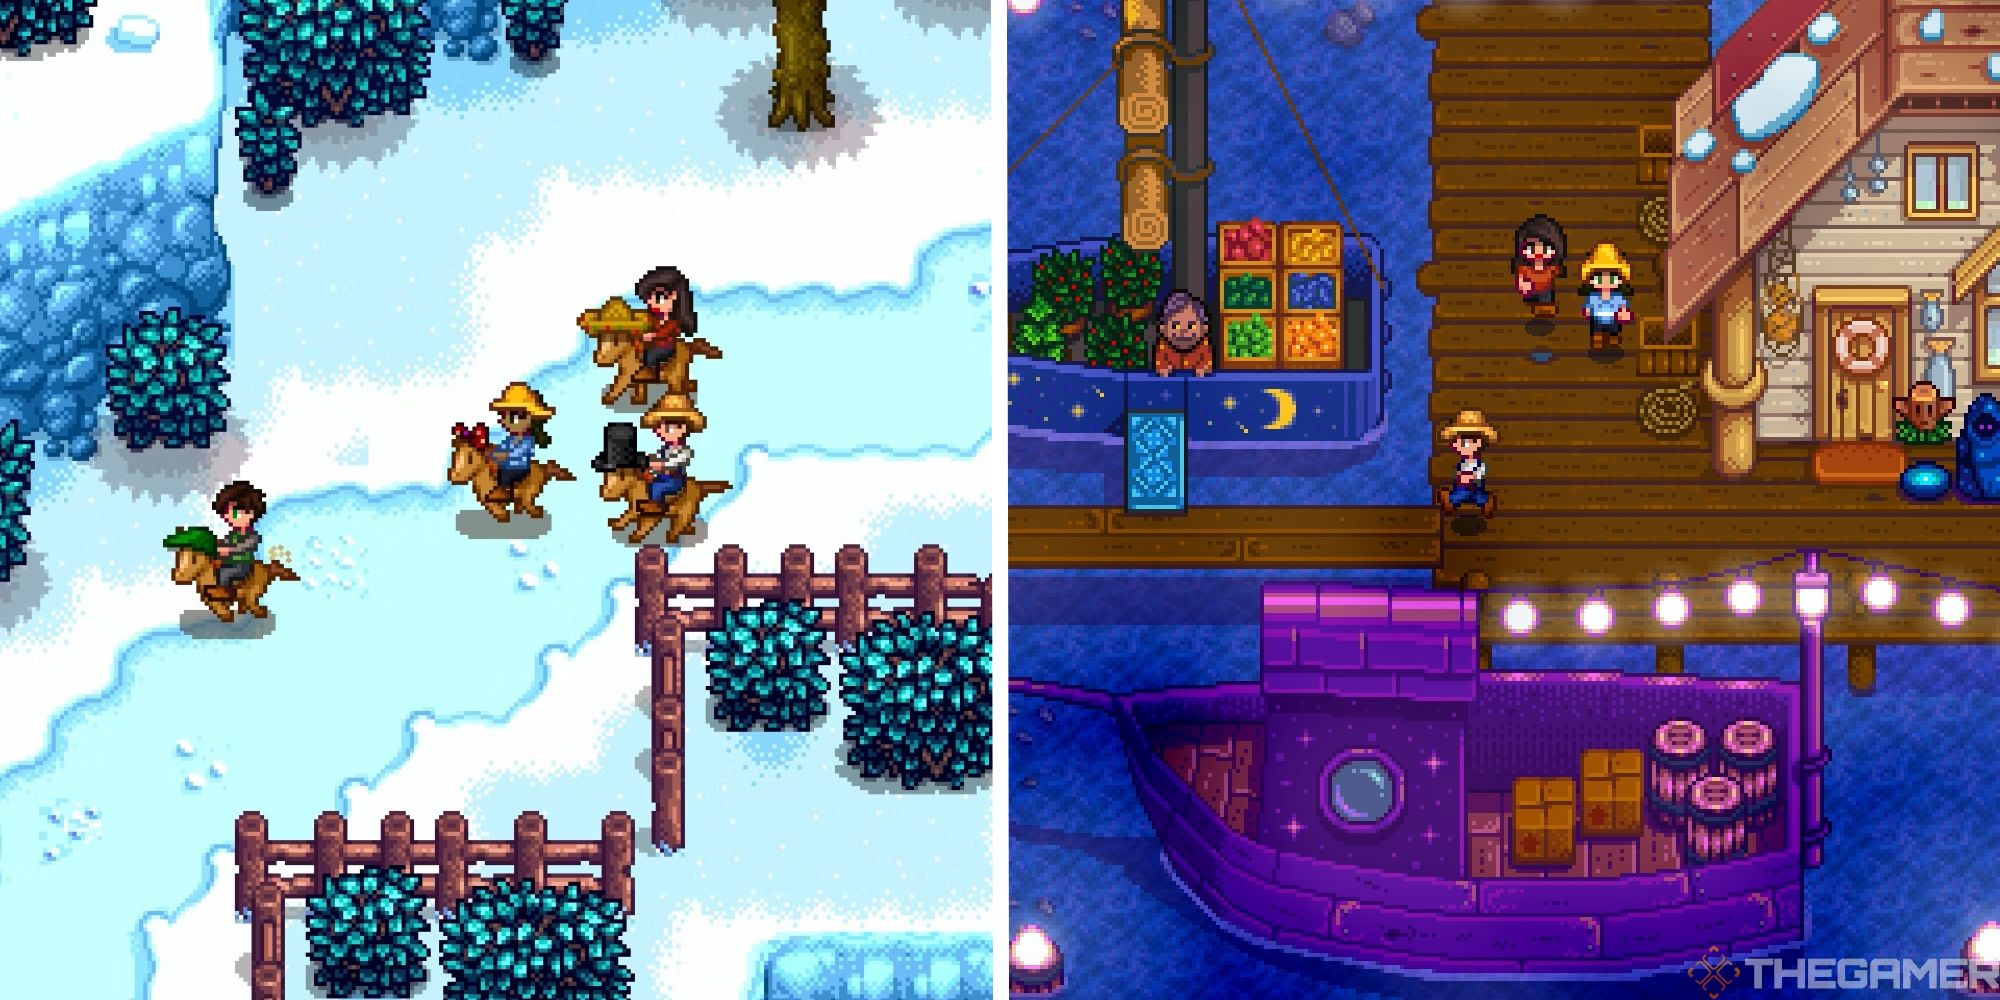 stardew valley split image showing players on horses next to image of players at winter night market